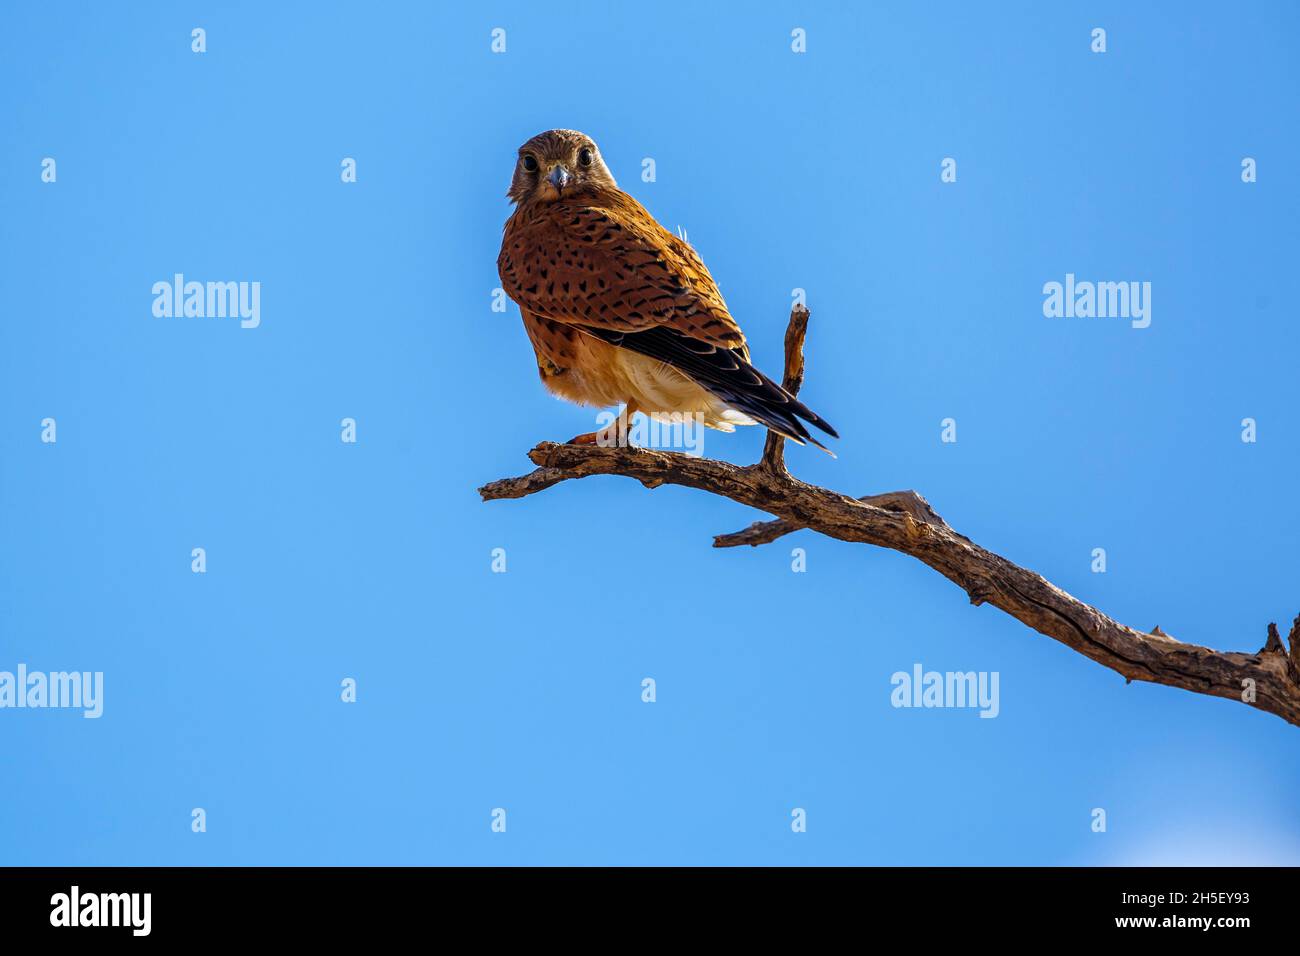 South African Kestrel perched on a branch isolated in blue sky in ...